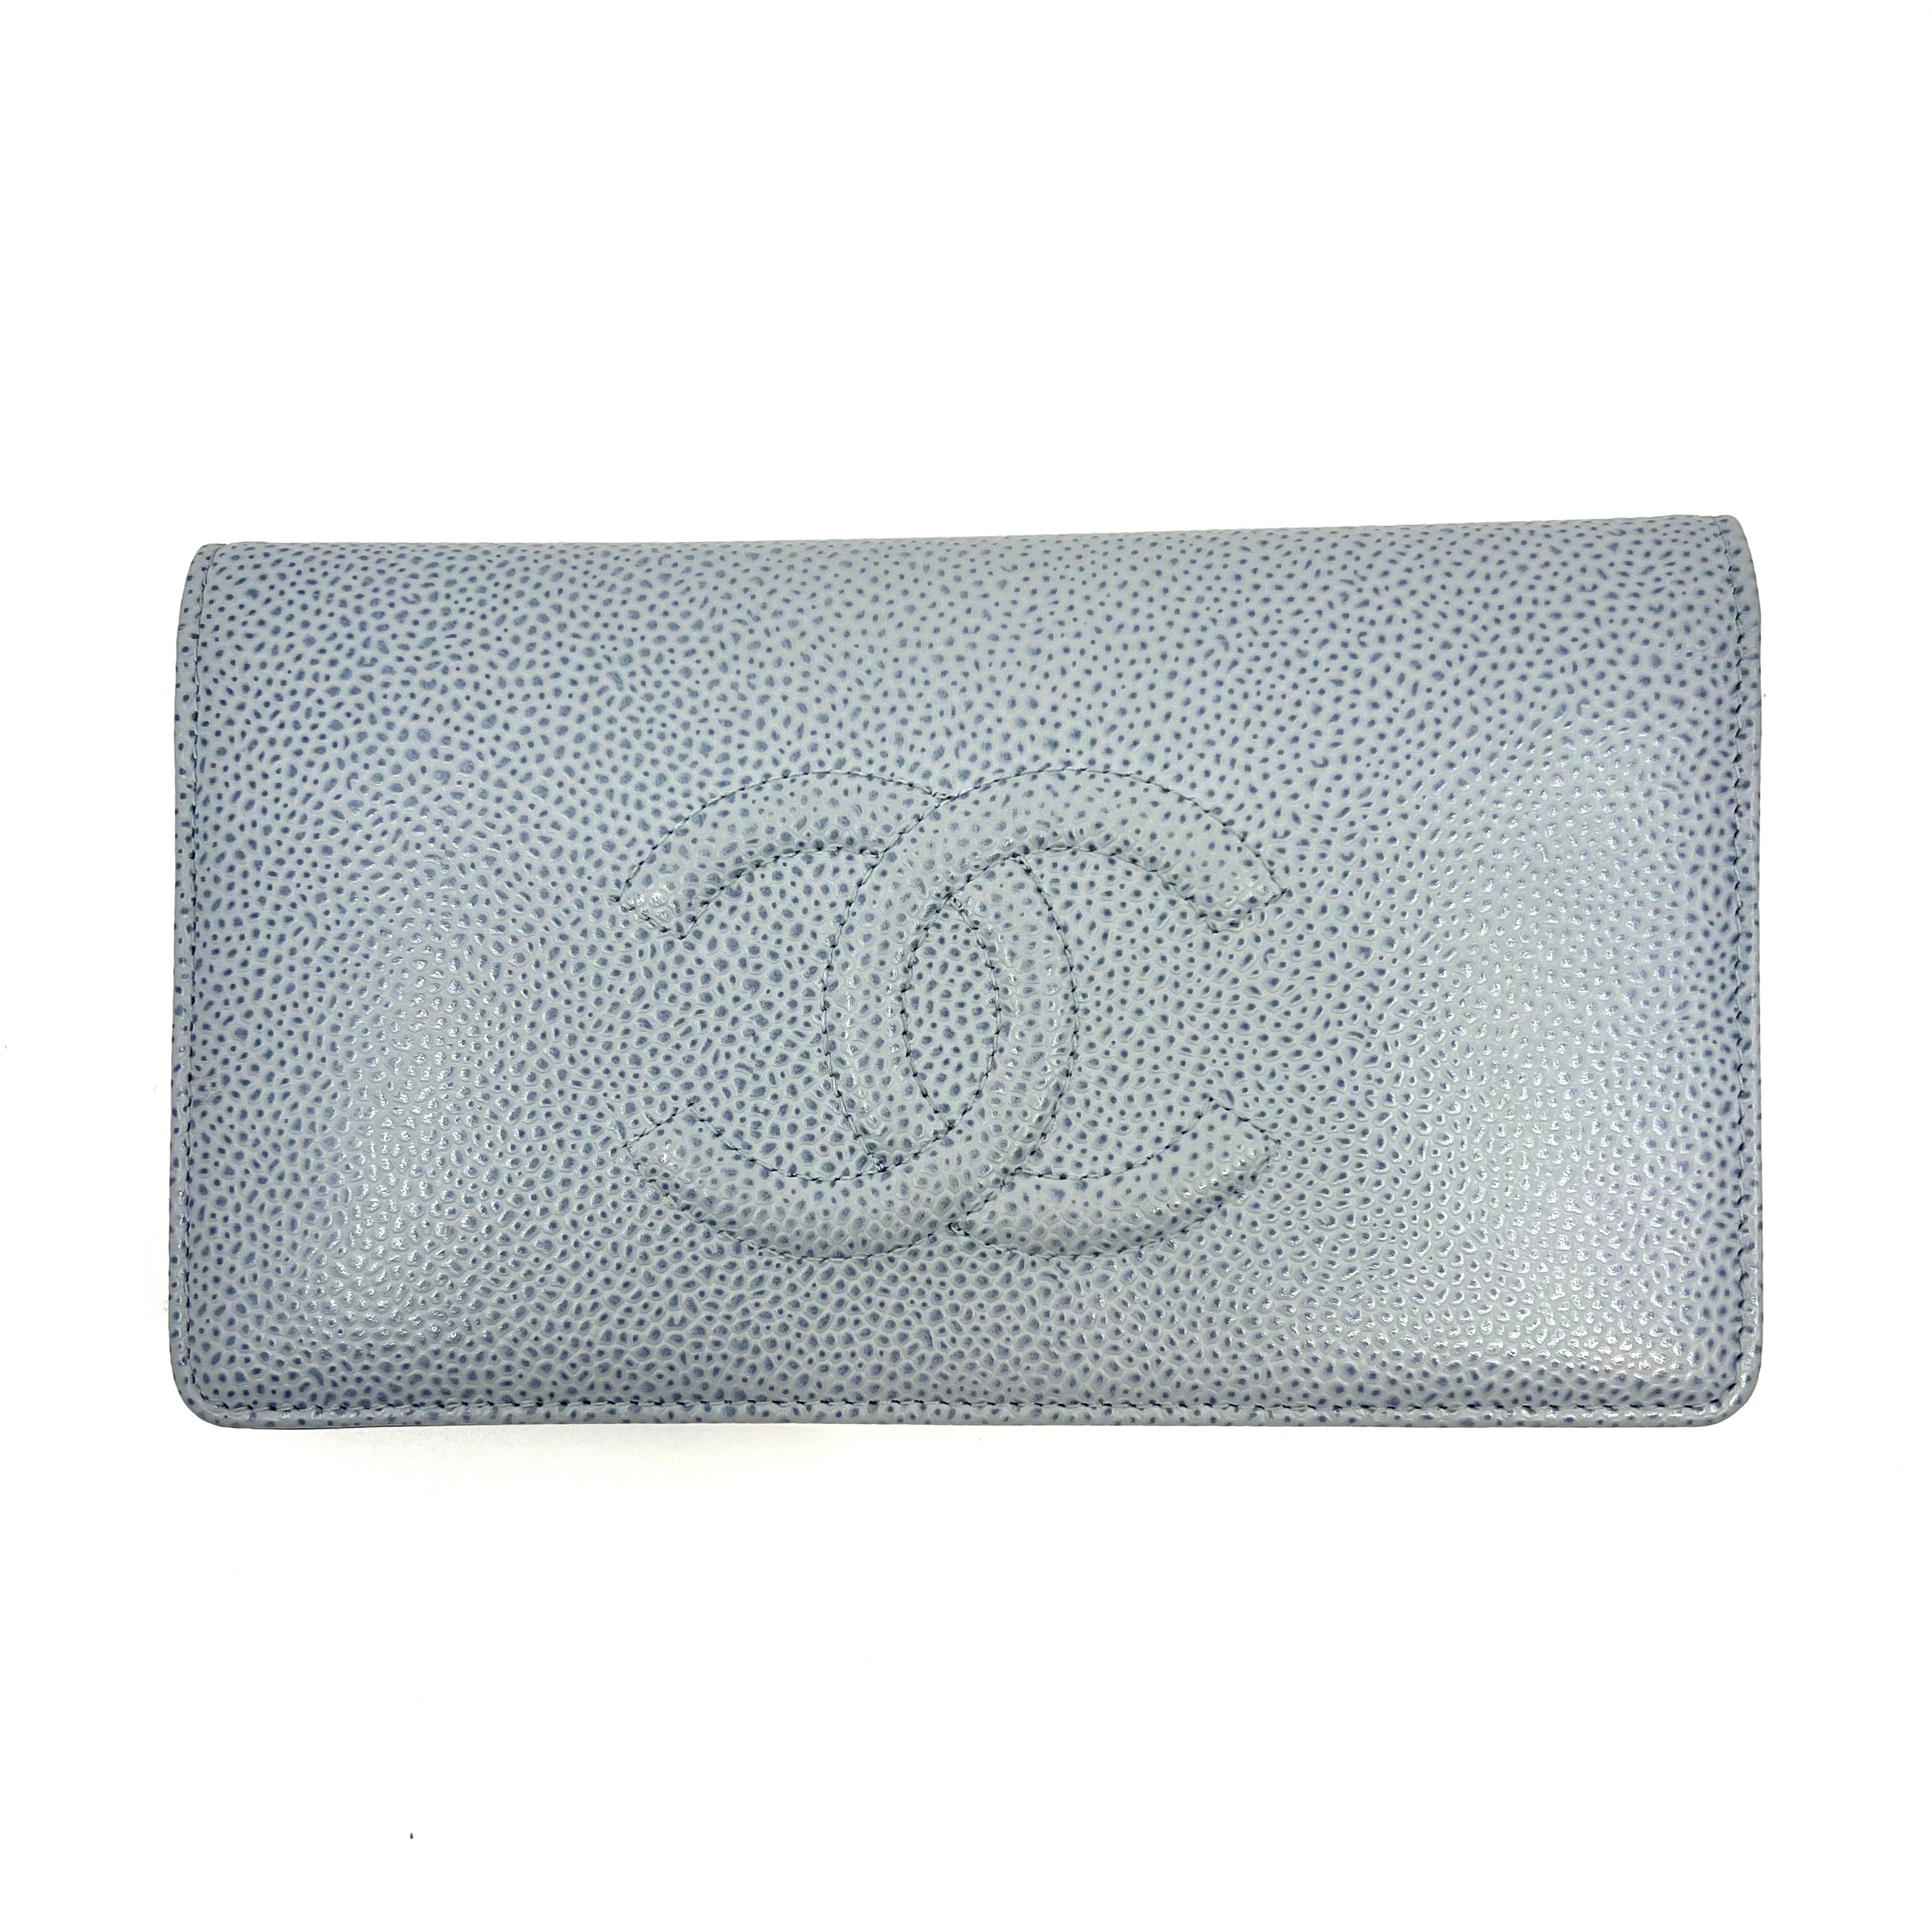 CHANEL Metallic Goatskin Quilted 2.55 Reissue Wallet on Chain WOC  Multicolor 1303480